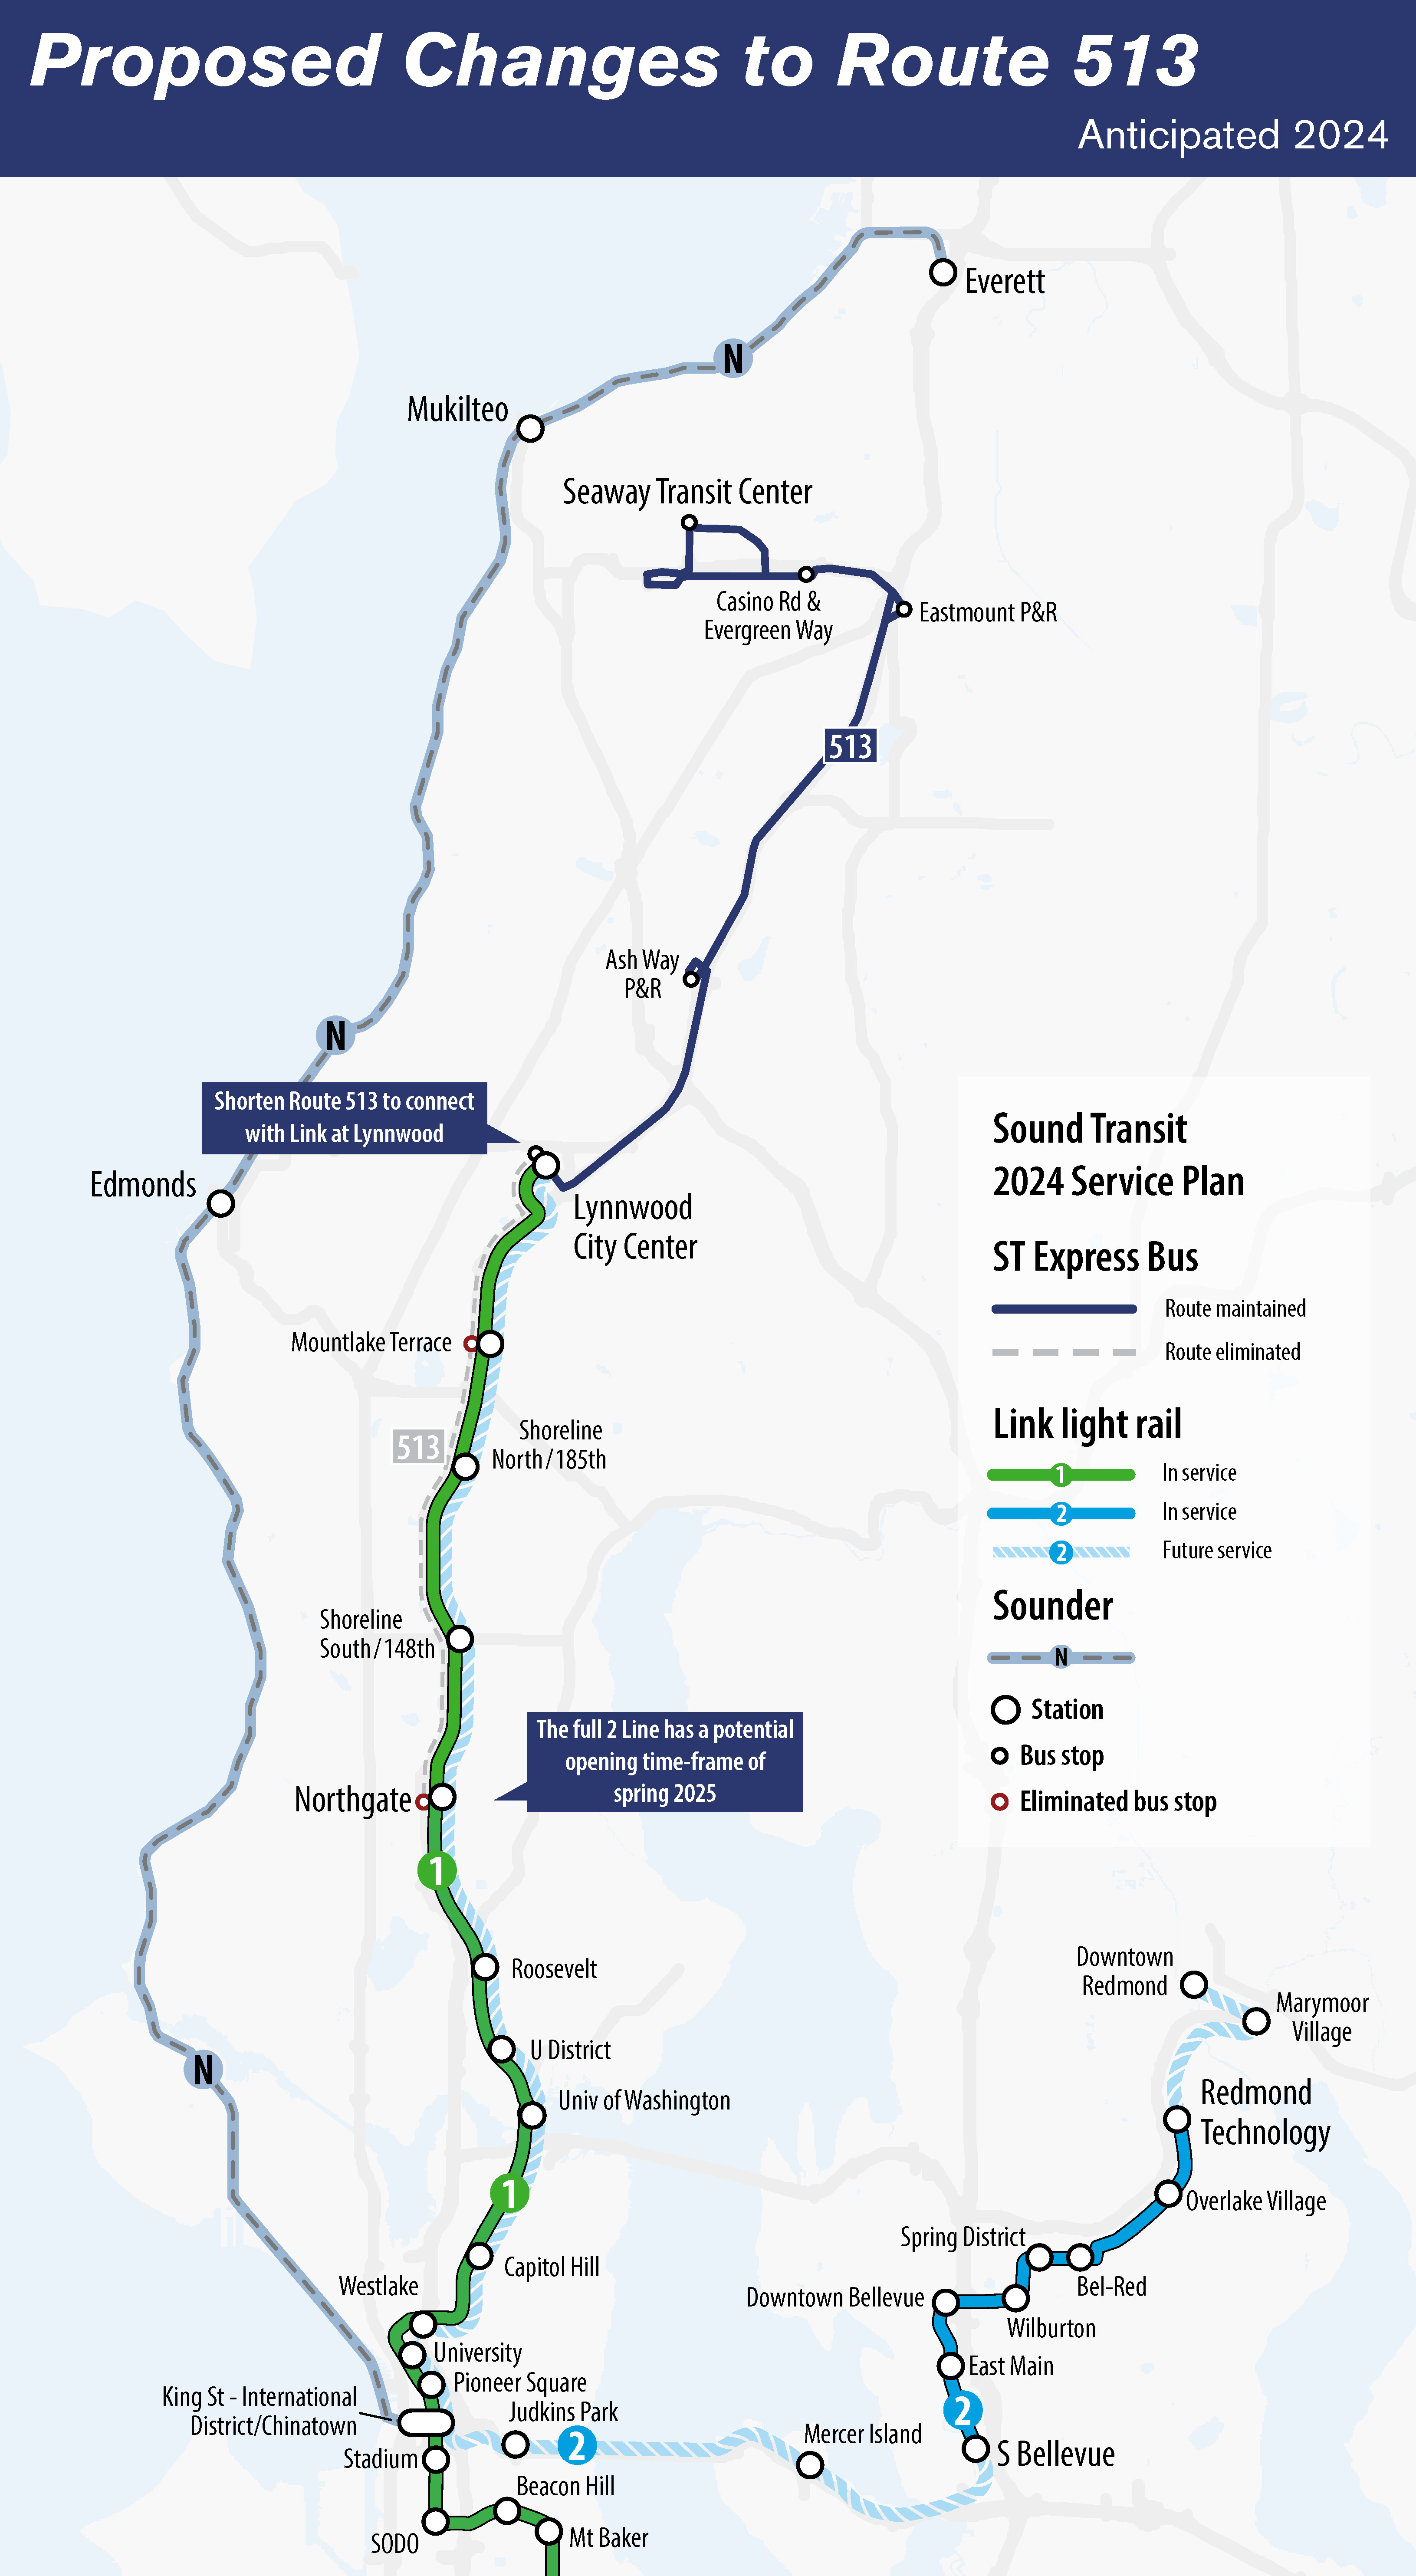 A map showing Express route 513 as it relates to Sound Transit's transit services in Seattle and the north and east subareas that include Everett, Seattle and Redmond. 


        The map shows Express route 513 in a strong dark blue line compared to other colored routes depicting Sounder train service, Link light rail service and other Express bus routes. Both the existing route 513 service area, as well as the future route 512 service area, are illustrated - the future route is bolded in dark blue while the existing route is shown in a light gray dotted line. 
        
        
        The current Express route 513 in light gray is depicted as it currently runs from Seaway Transit Center to Northgate Station along Interstate 5. However, the future route in dark blue is depicted running from Seaway Transit Center in the north, to the new southernmost destination at Lynnwood City Center, which will be the southernmost destination once Lynnwood Link Extension opens.